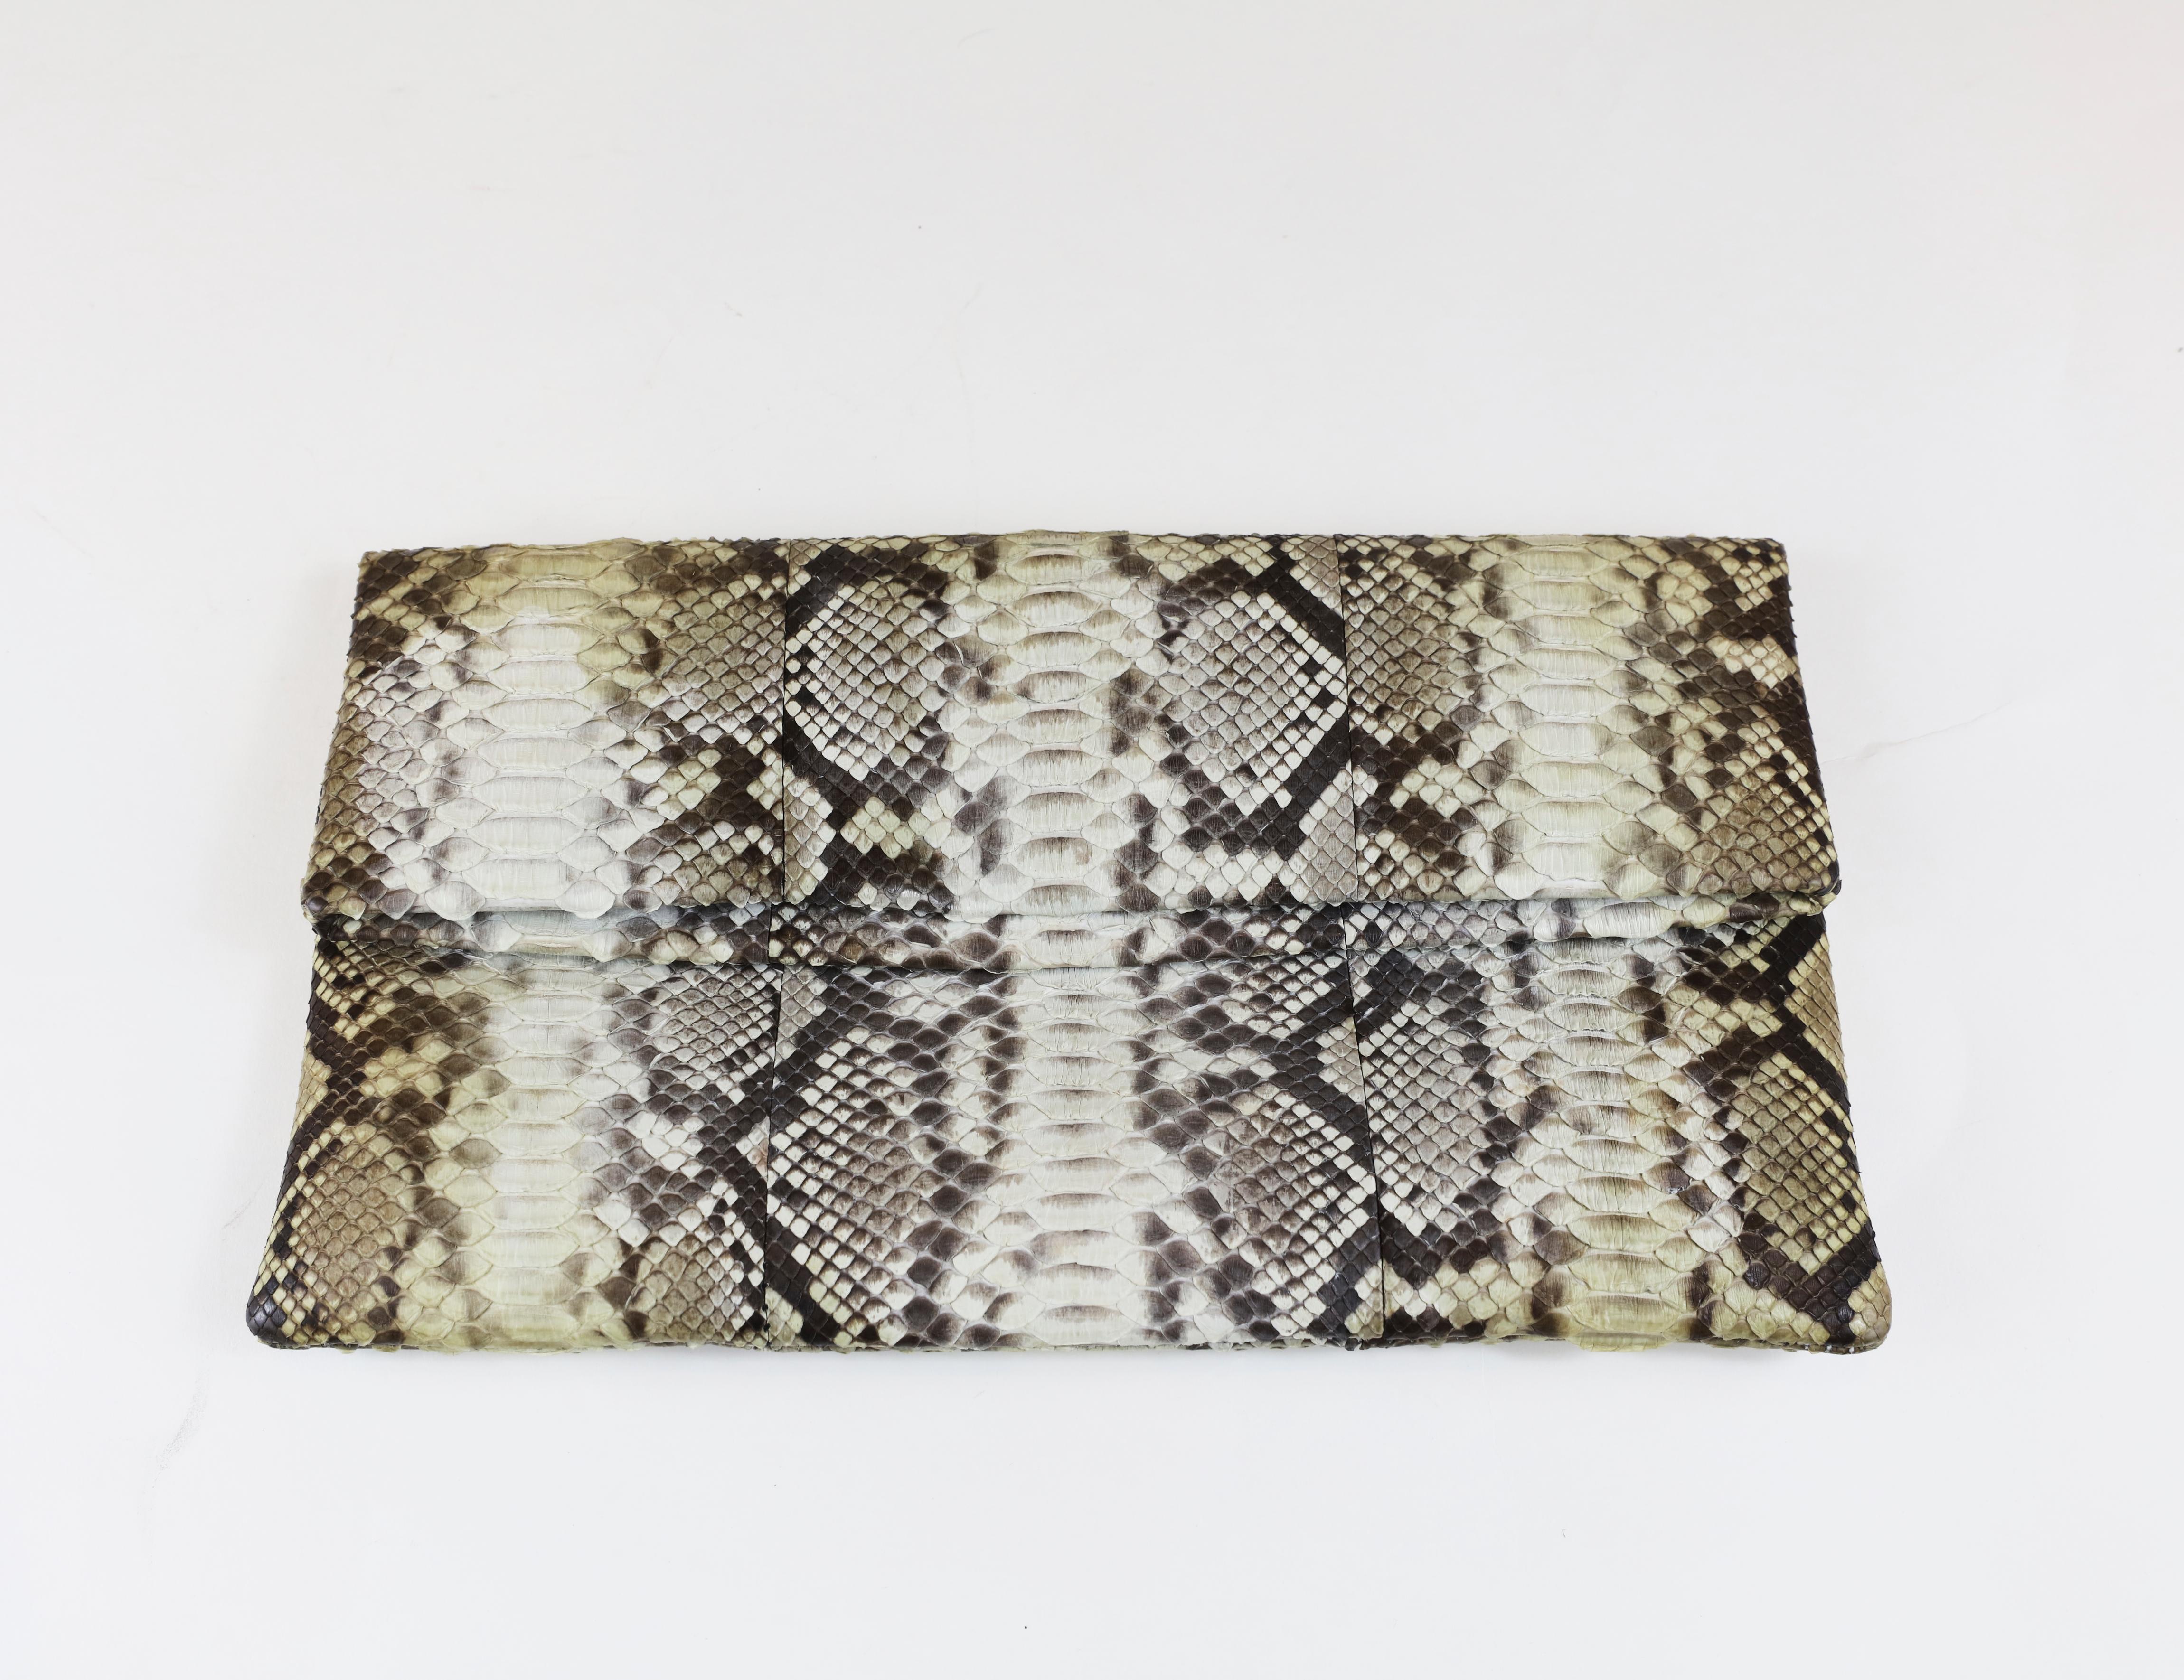 Damian Morrison Gray/Multi Python Clutch with Flap Closure
10.5